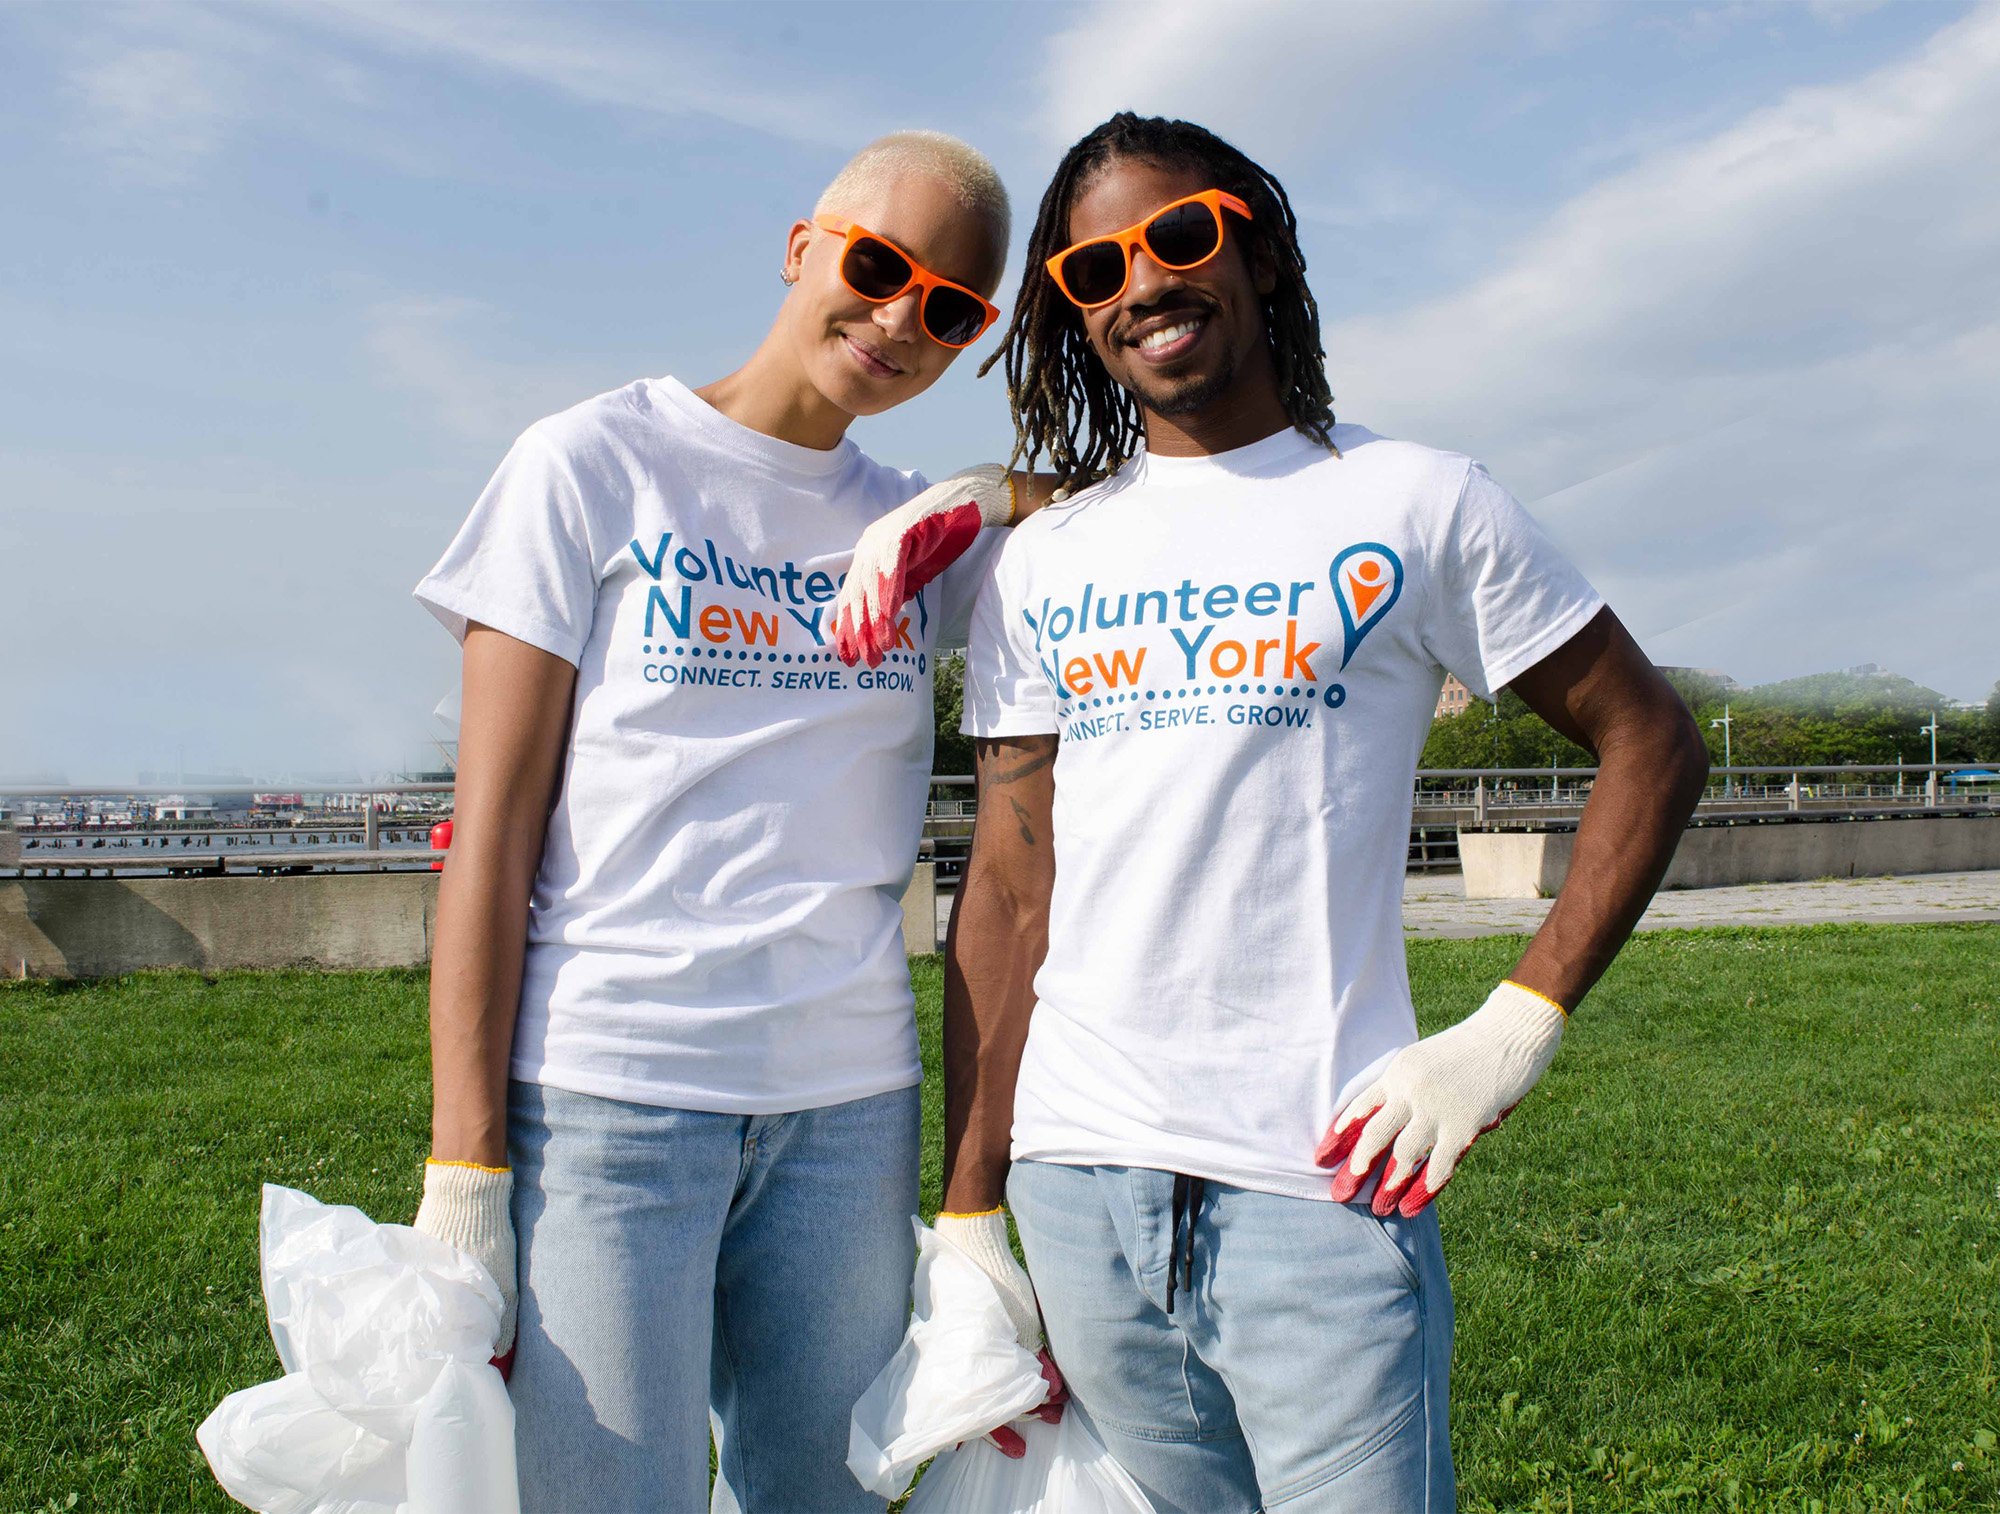 PUTTING VOLUNTEERS AND NONPROFITS TOGETHER TO IGNITE CHANGE